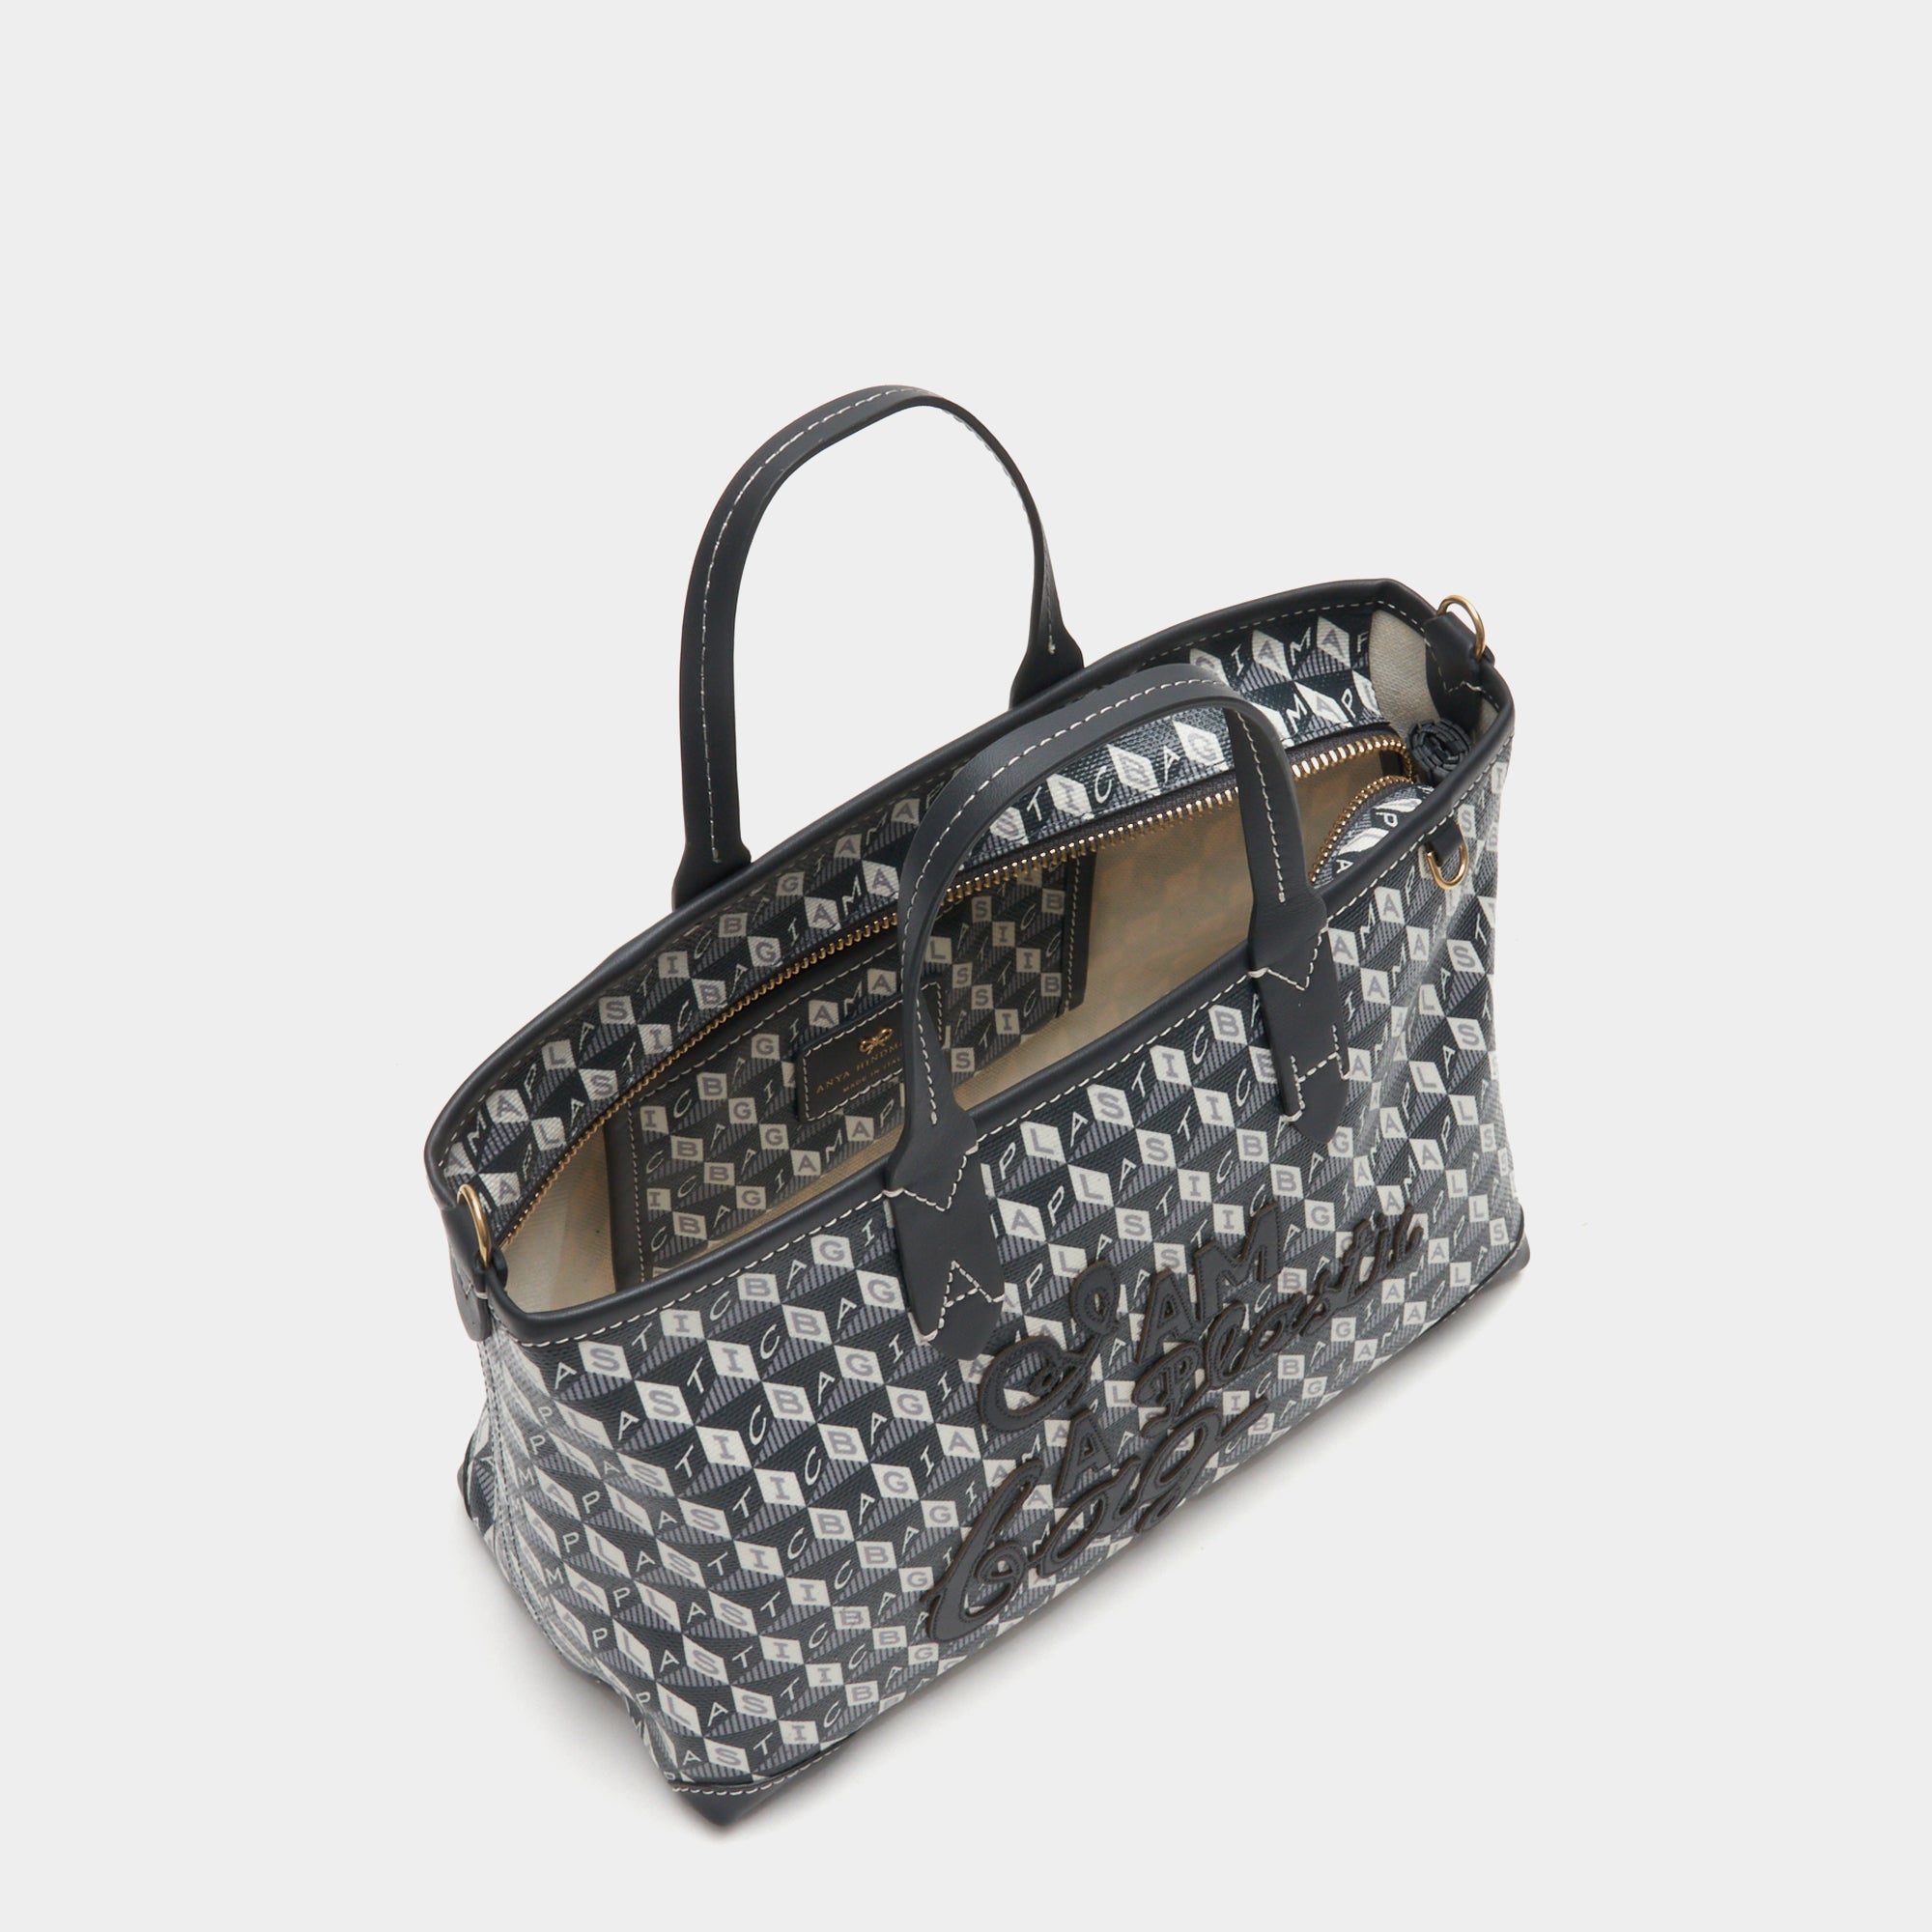 「I AM A Plastic Bag」 XS モチーフ トート -

                  
                    Recycled Coated Canvas in Charcoal -
                  

                  Anya Hindmarch JP
